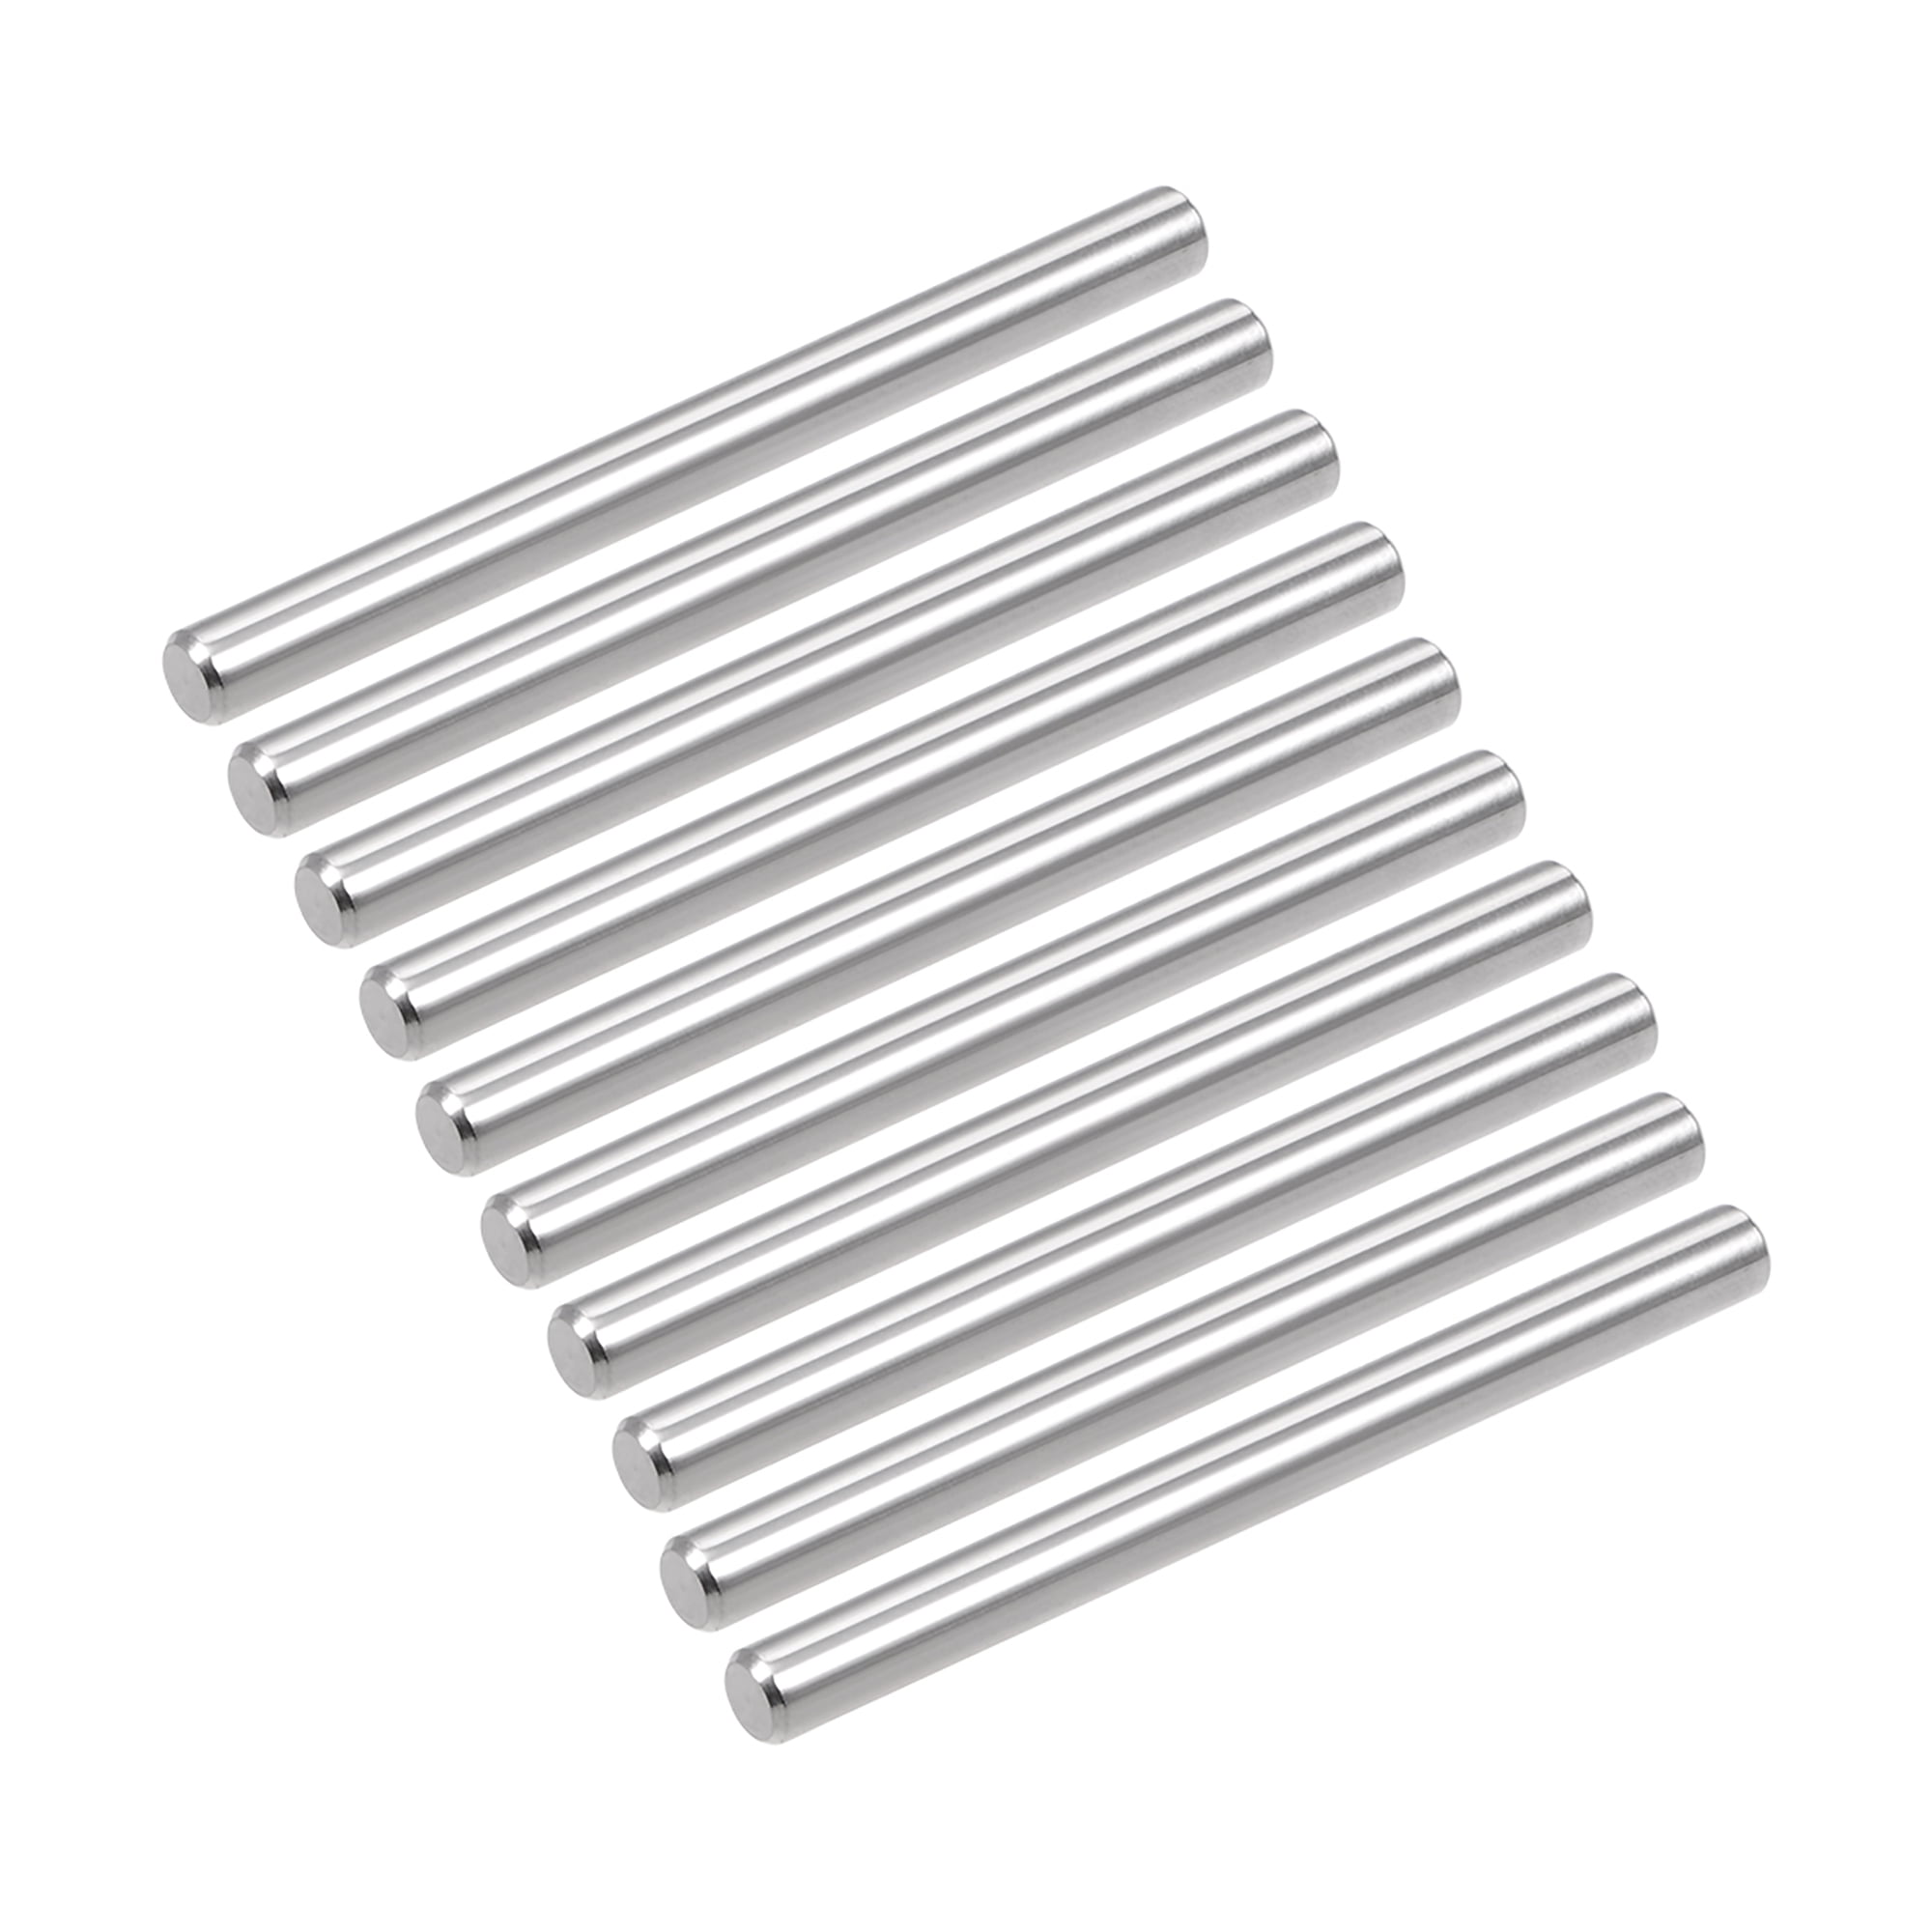 18-8 Stainless Steel Dowel Pins 5/32" Dia x 1.00" Length 20 Pieces 